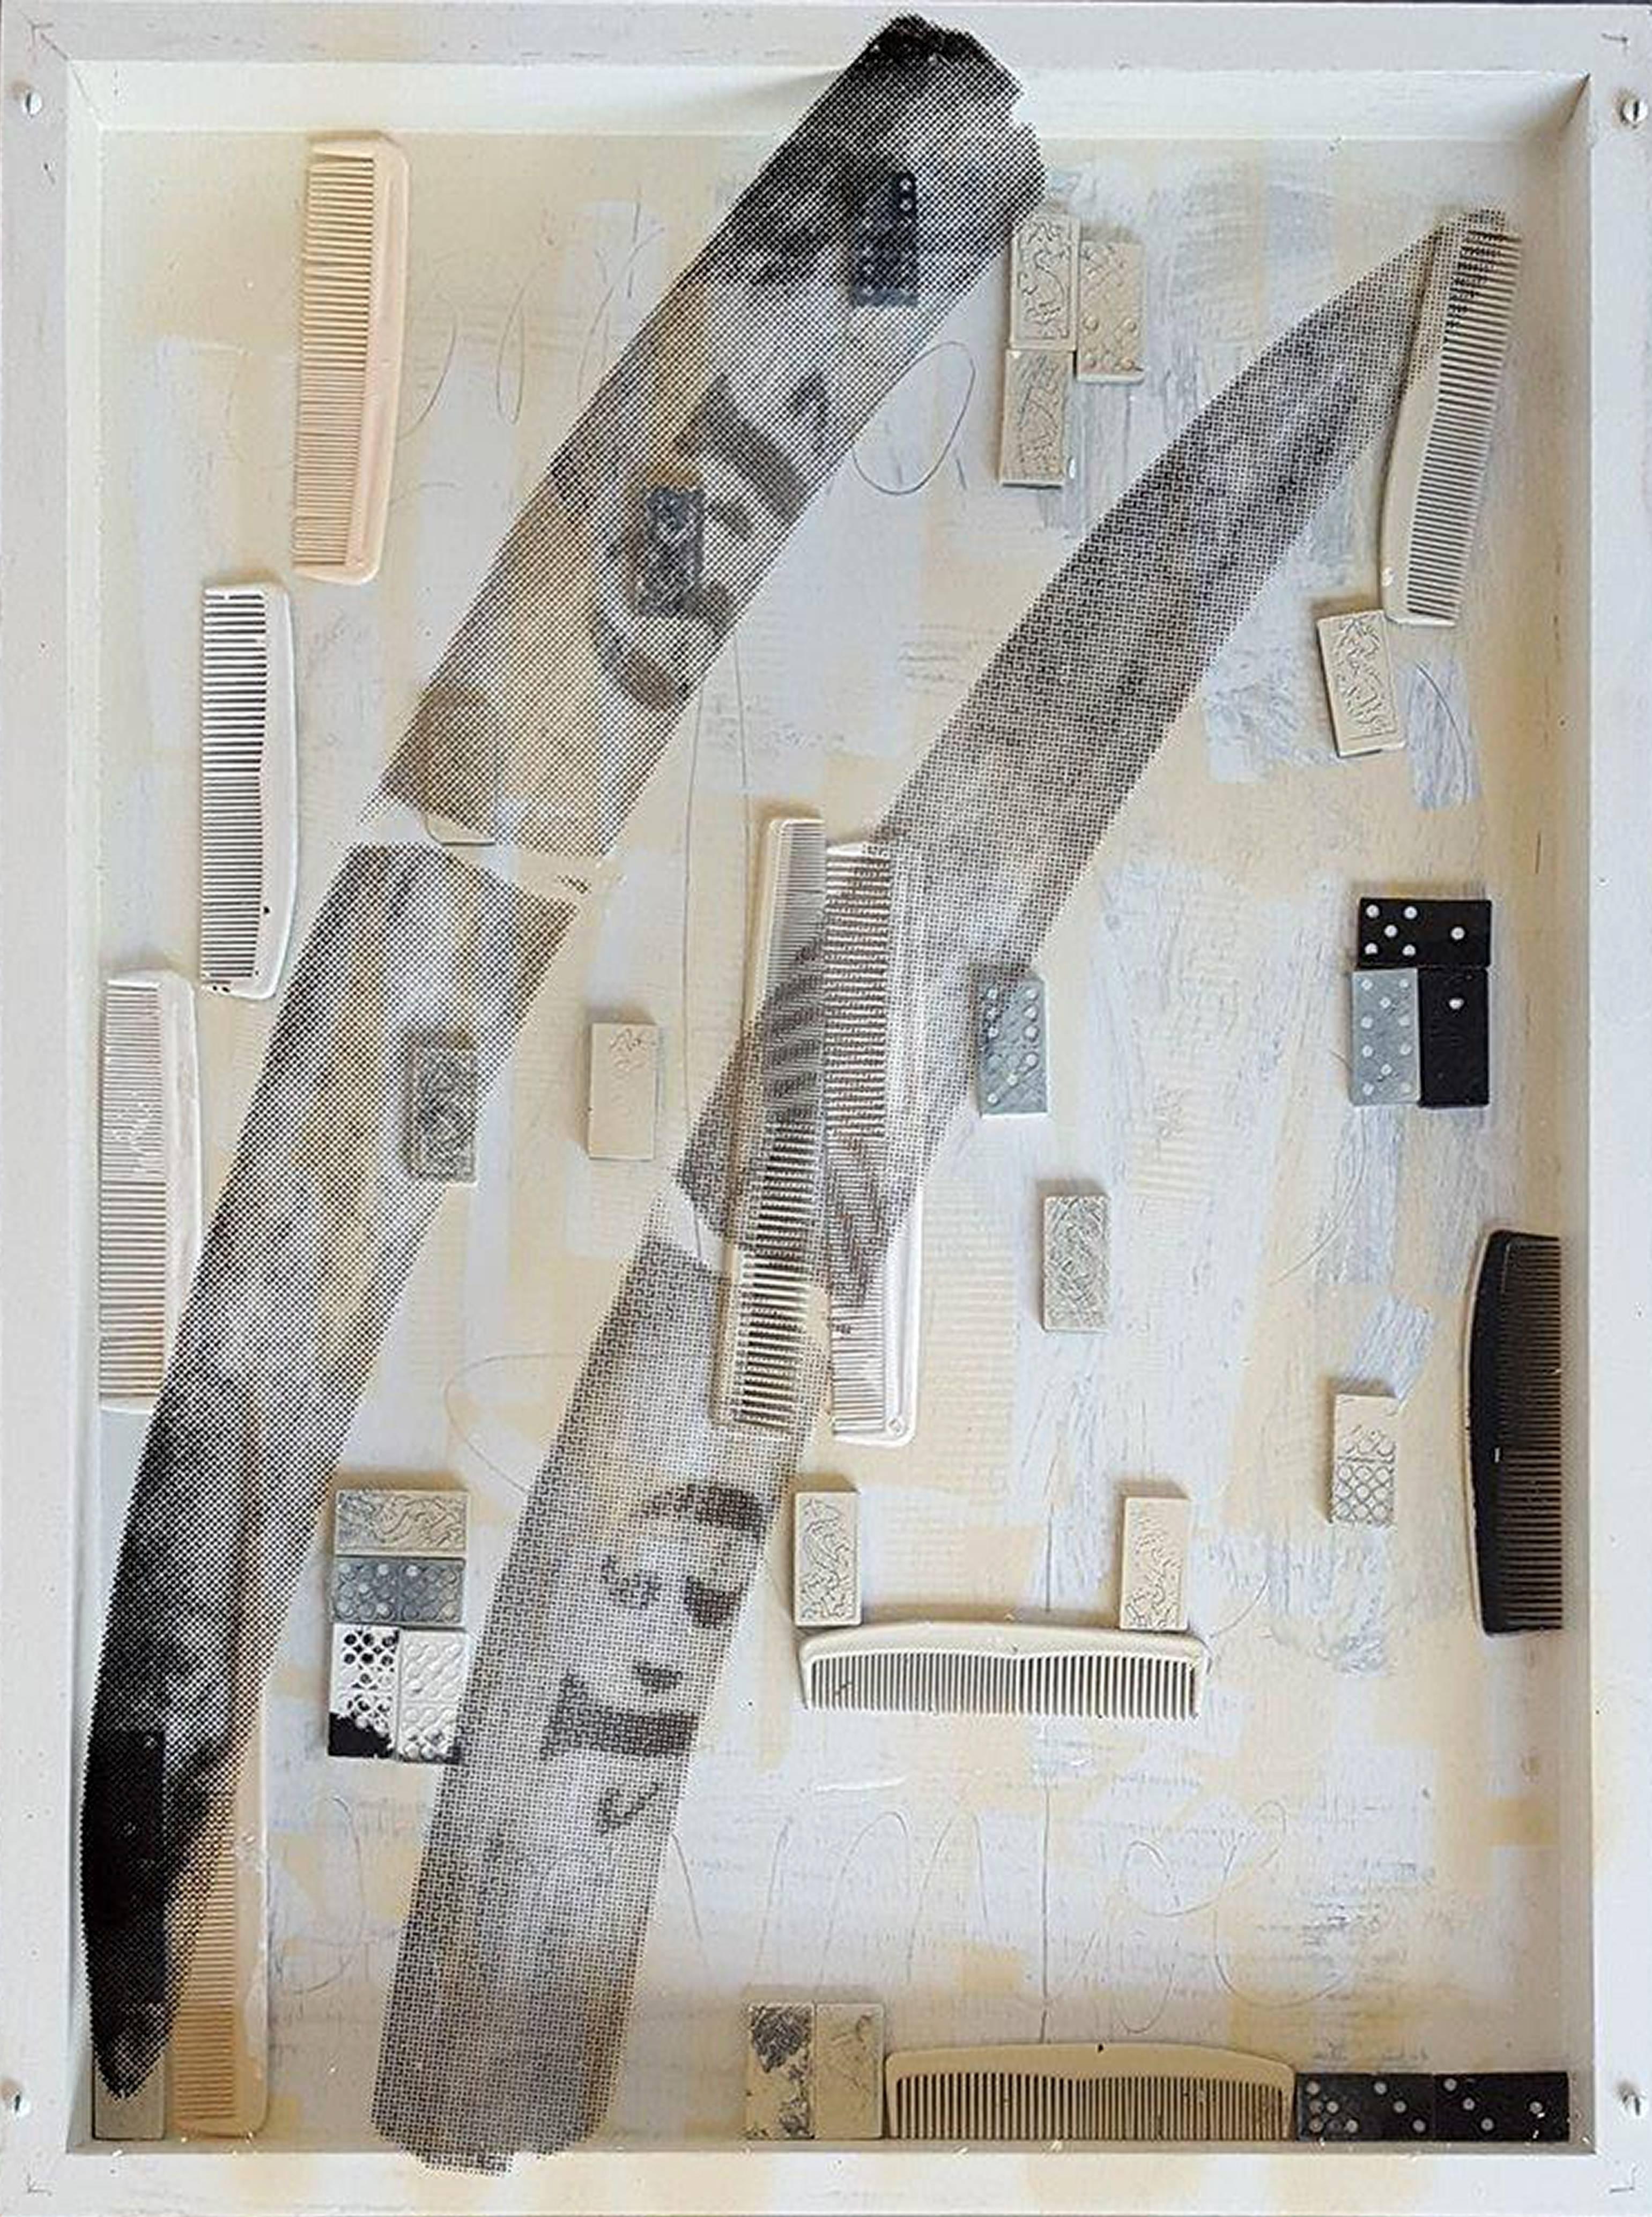 Magic Tusk Box / Combs and Dominoes - Mixed Media Art by Roxanne Faber Savage